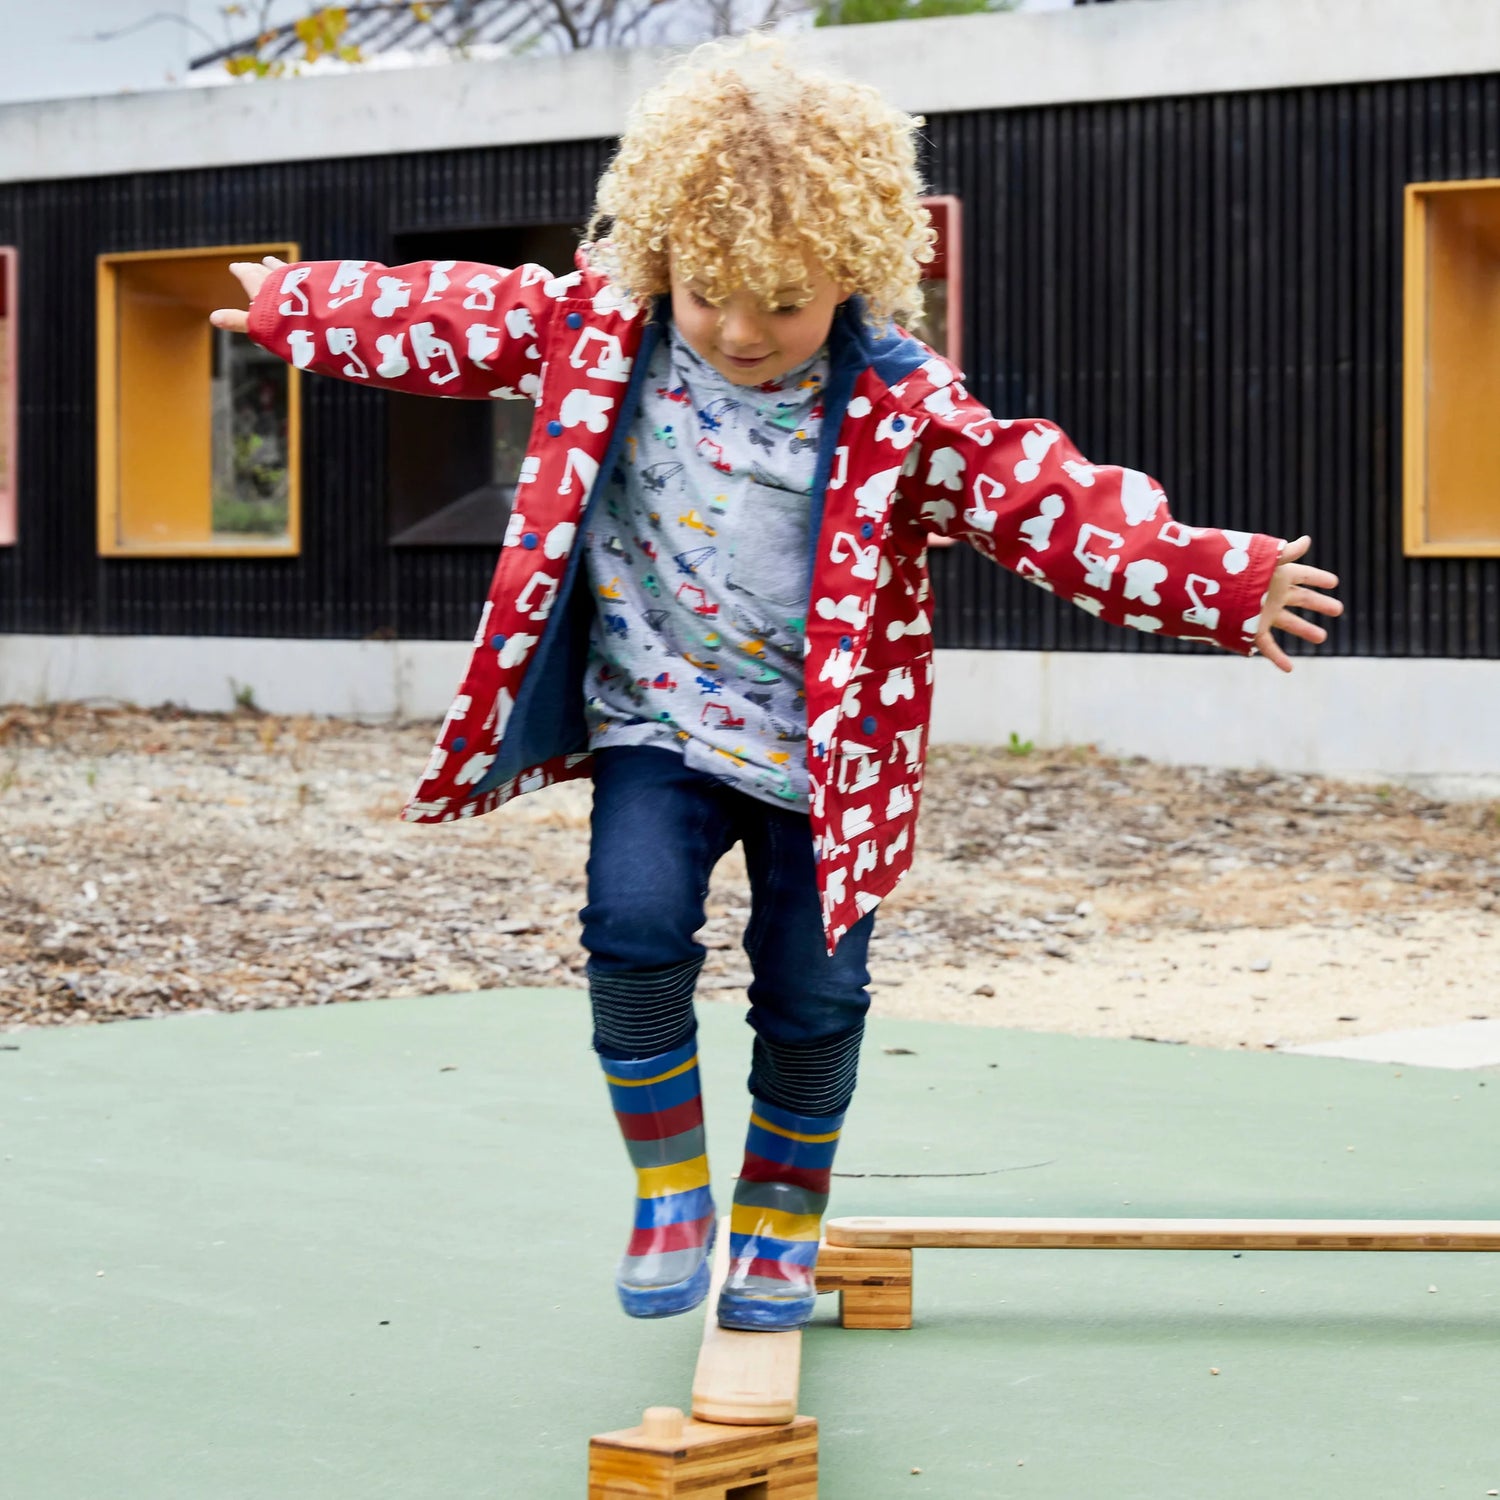 Boy on balancing beam wearing colourful kids gumboots and red raincoat that changes colour